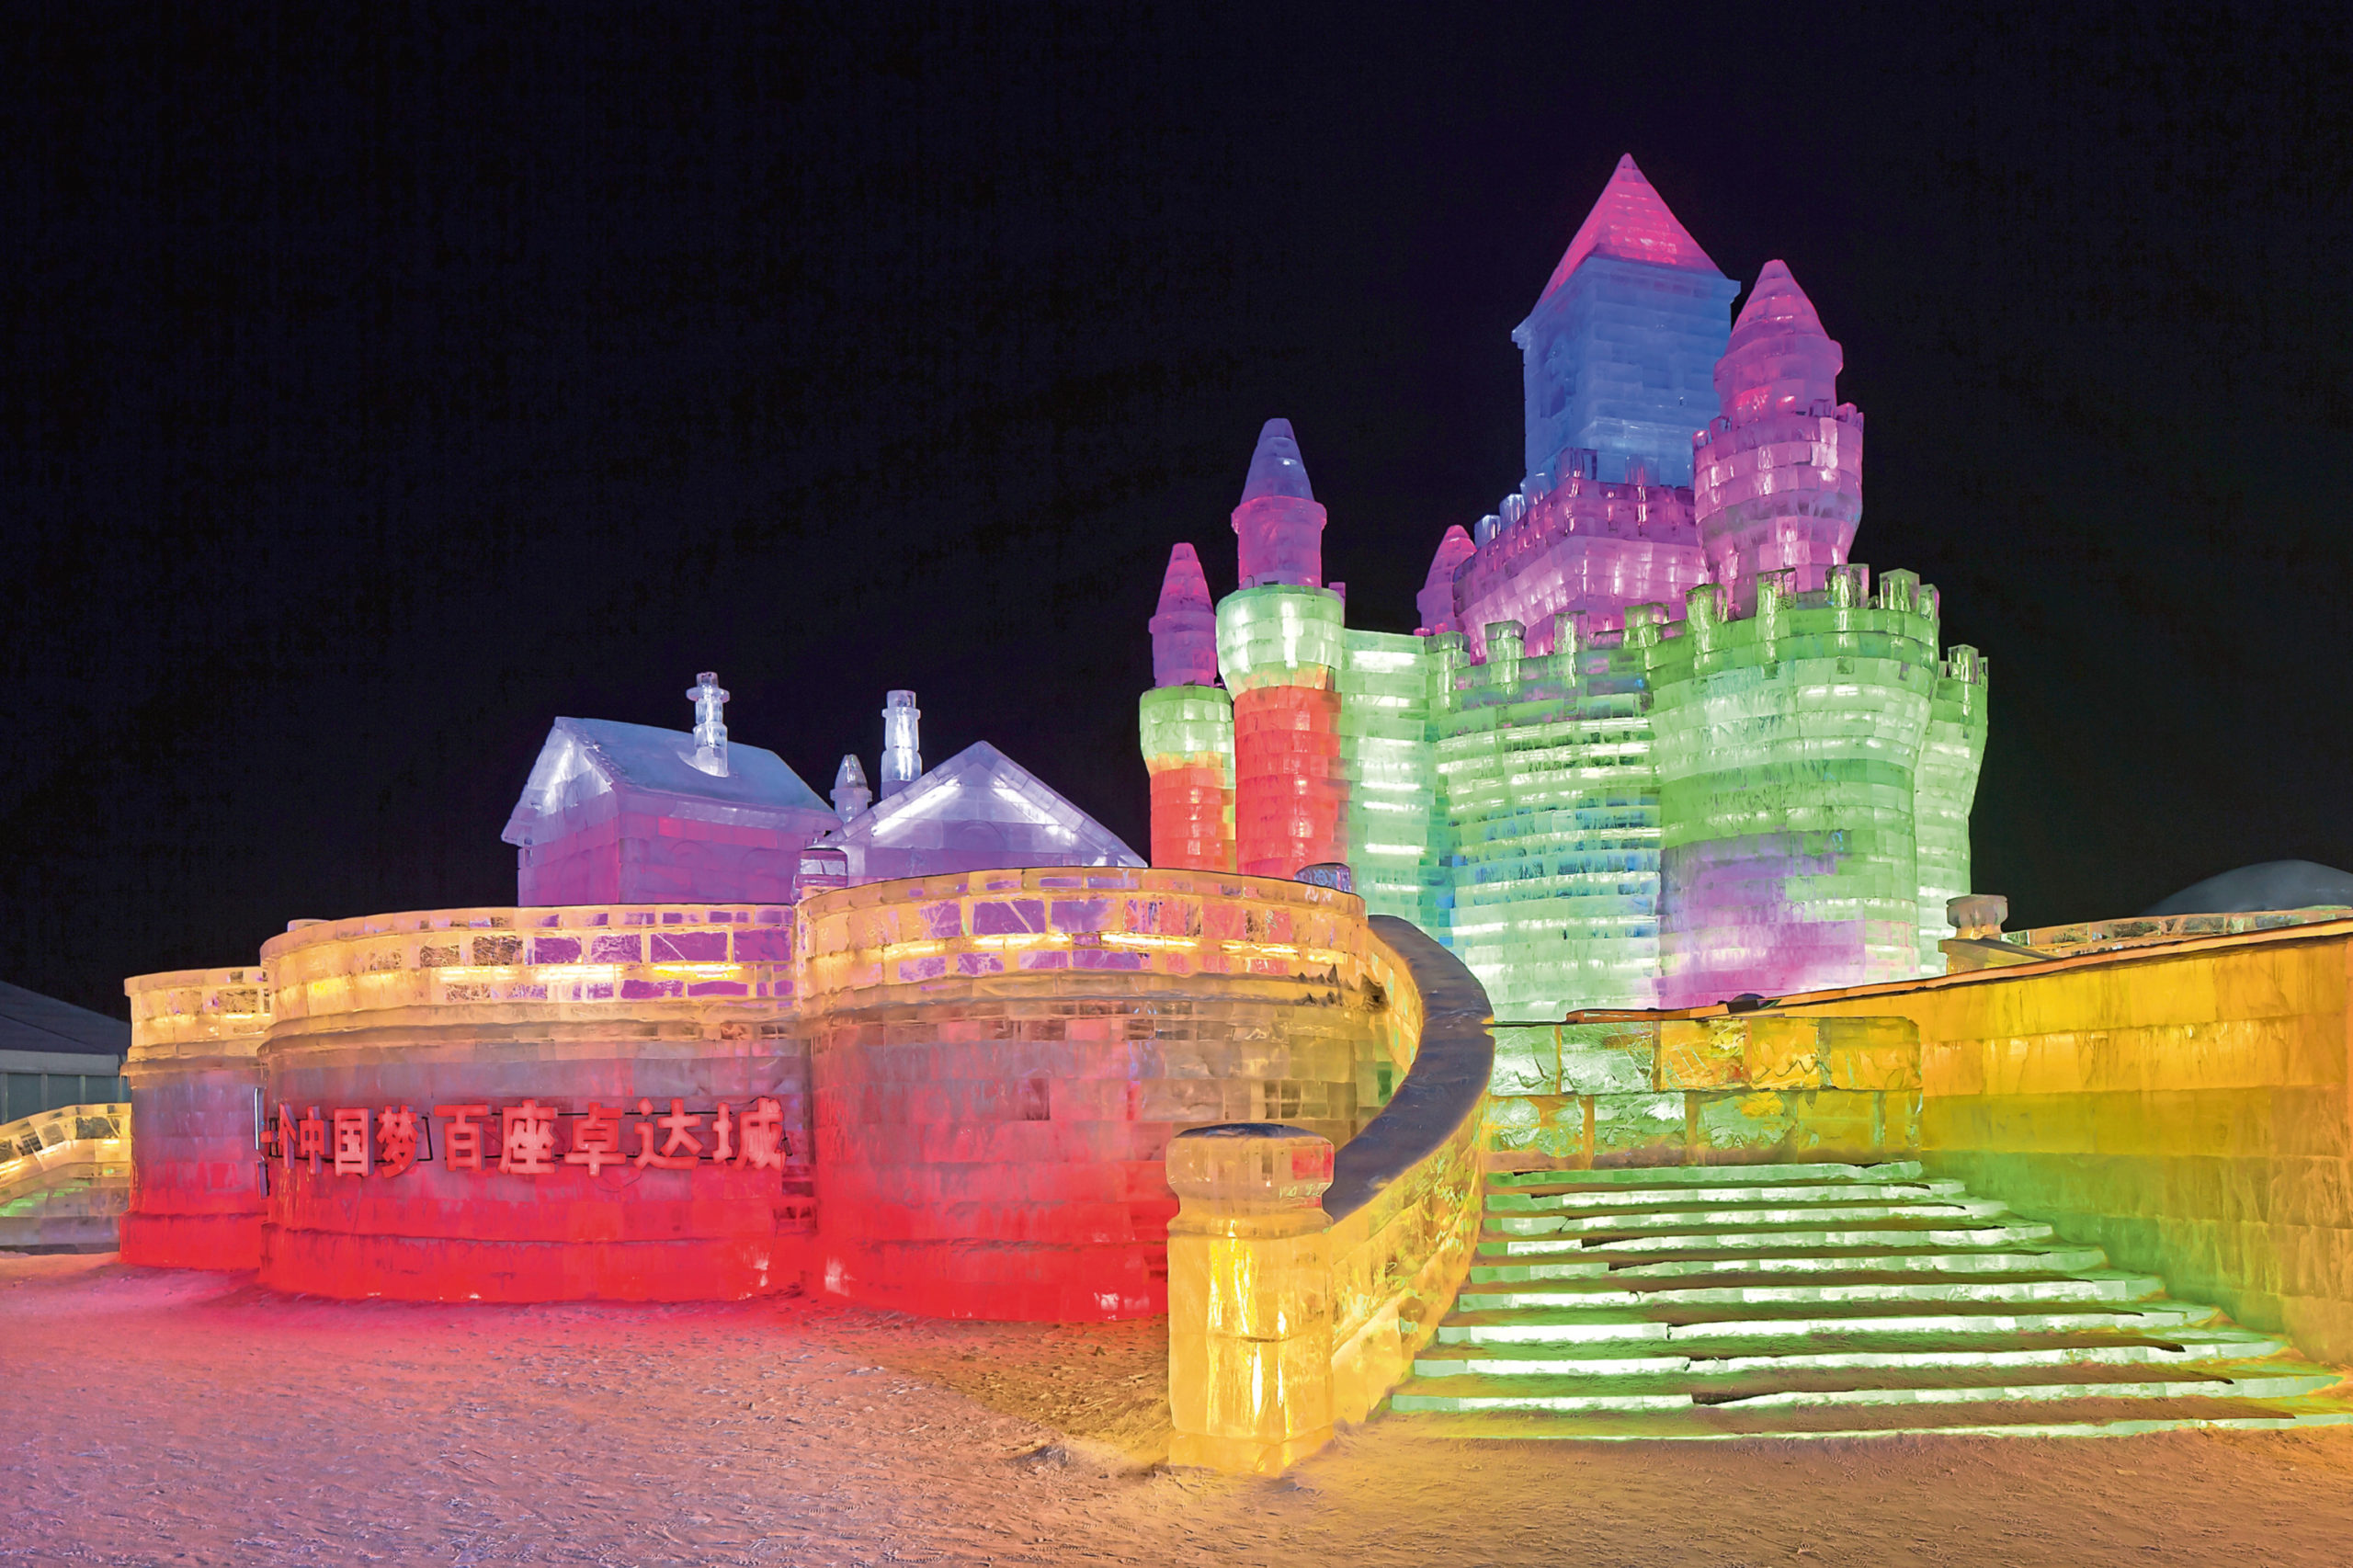 A giant ice sculpture at Harbin Ice and Snow Festival in China